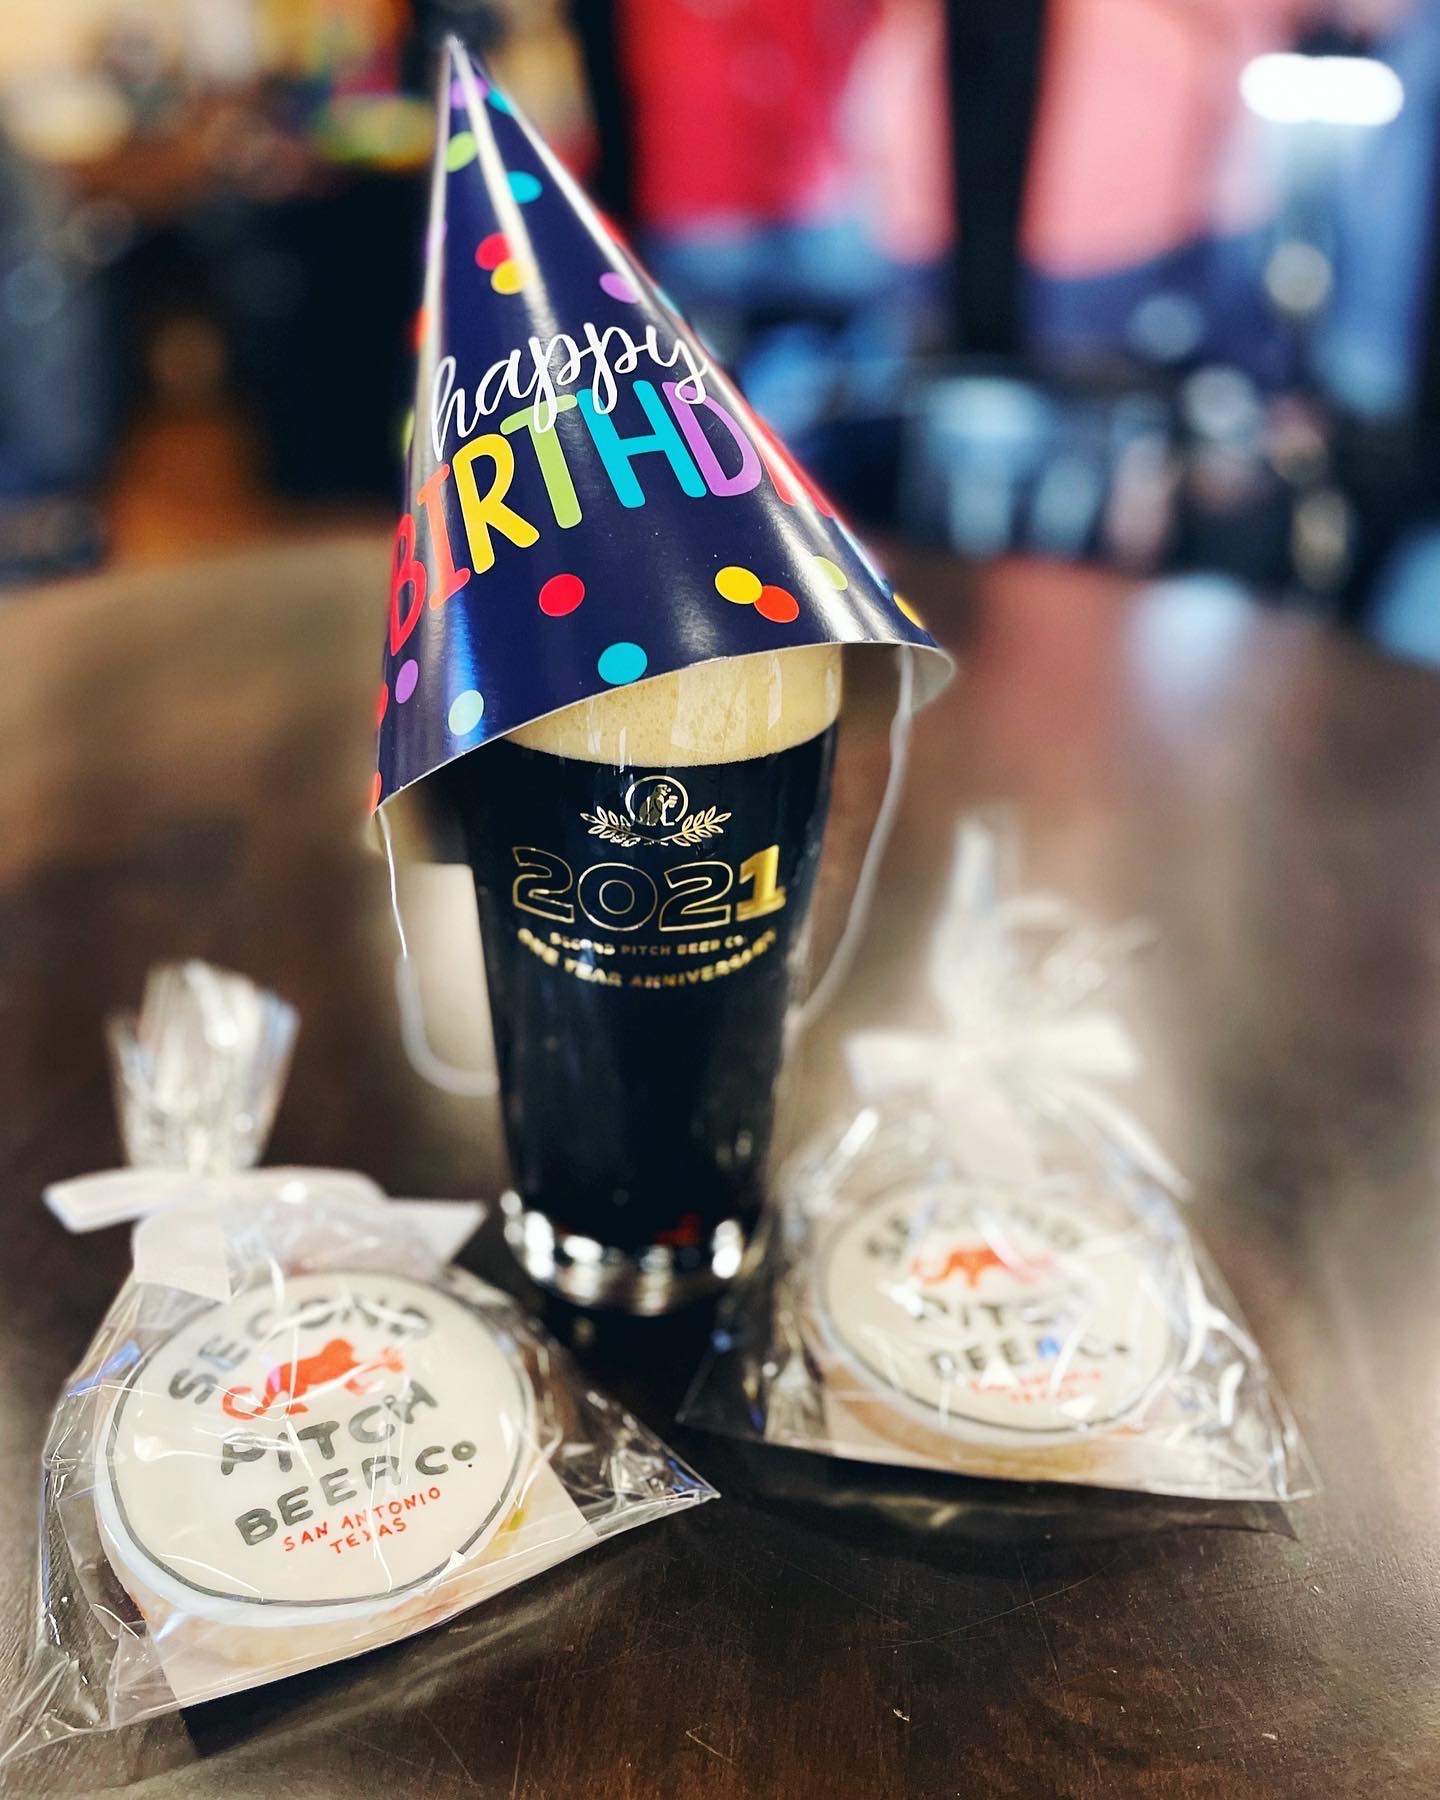 Beer wearing a birthday party hat